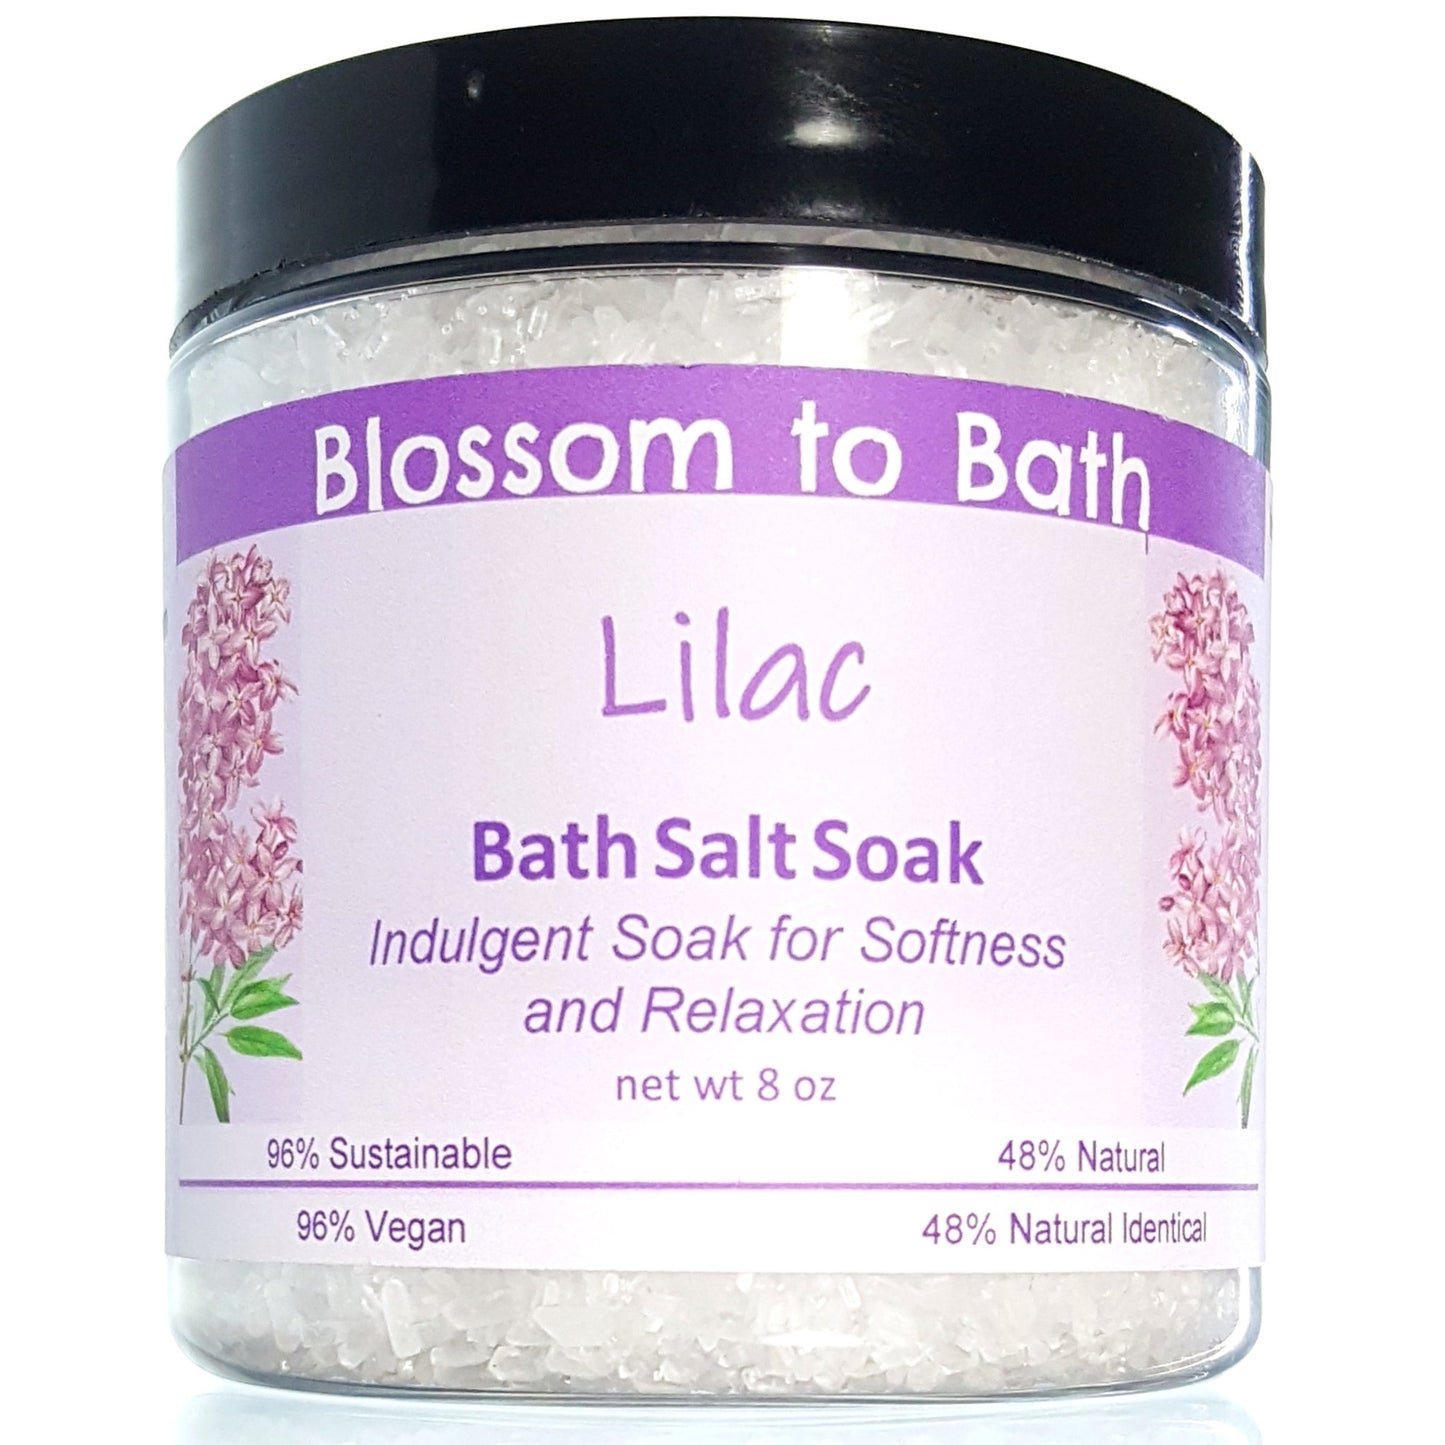 Buy Blossom to Bath Lilac Bath Salt Soak from Flowersong Soap Studio.  Scented epsom salts for a luxurious soaking experience  The scent of a freshly blooming lilac bush, the embodiment of spring flowers.